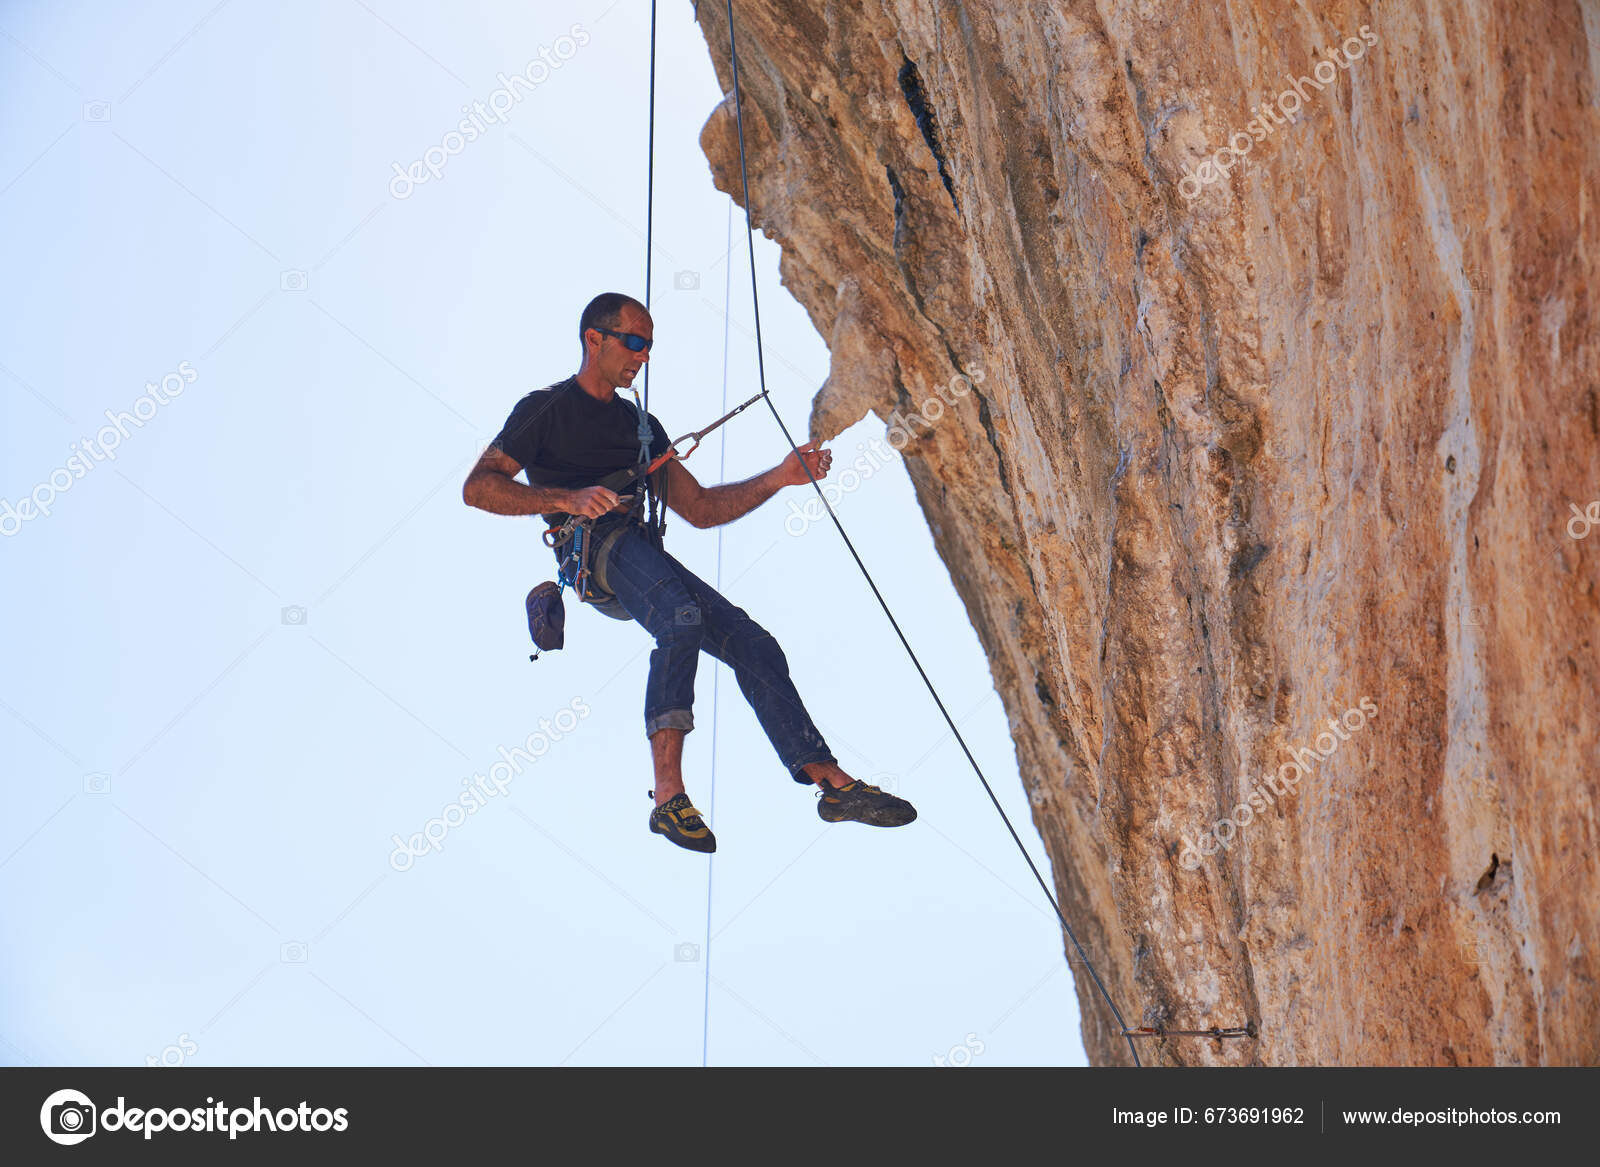 Full Body Side View Male Alpinist Hanging Rope While Descending